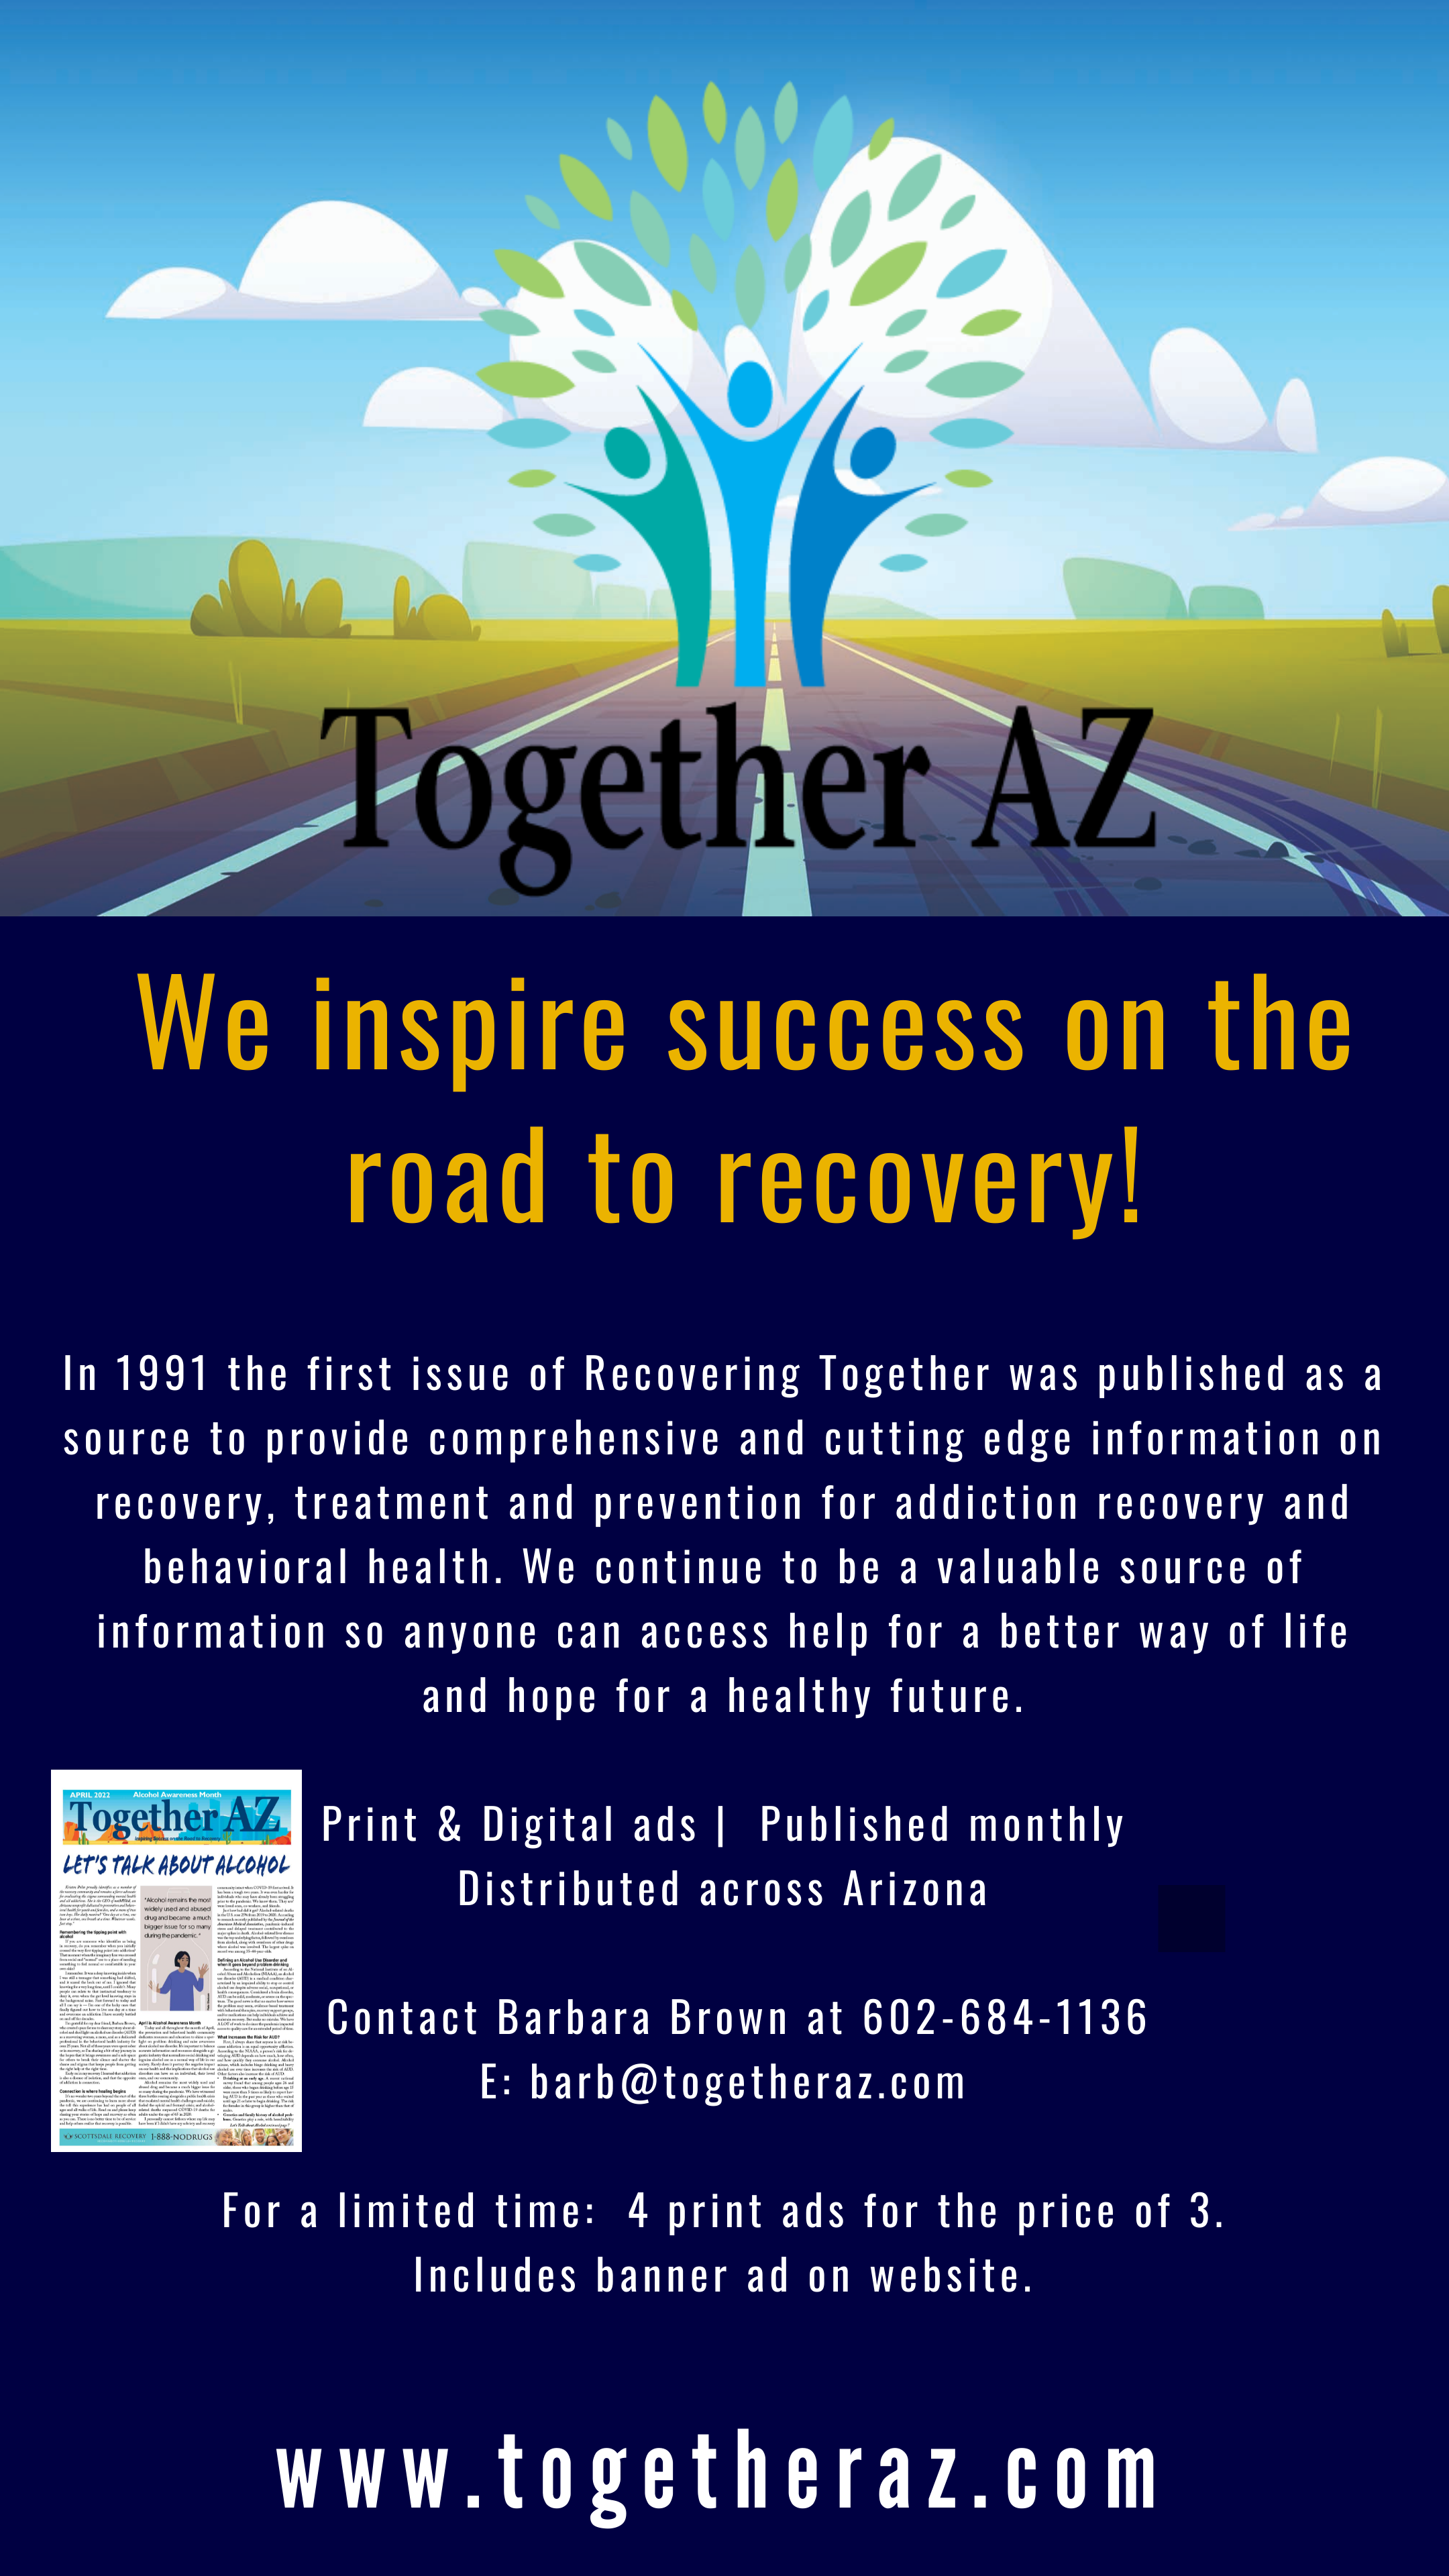 We inspire success on the road to recovery.